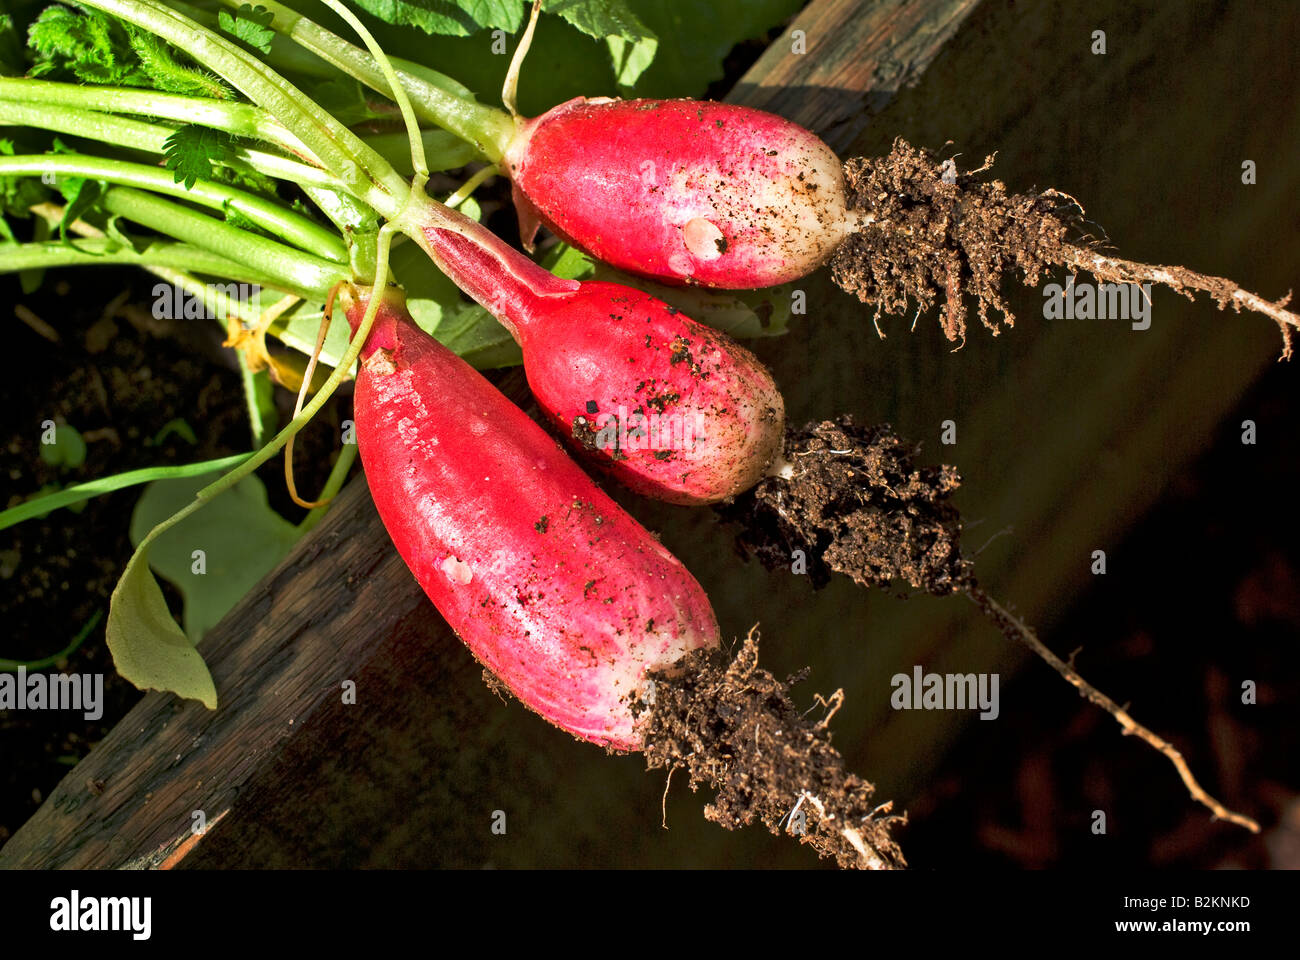 Freshly picked radishes French Breakfast 3 grown in a raised wooden raised container in UK Stock Photo